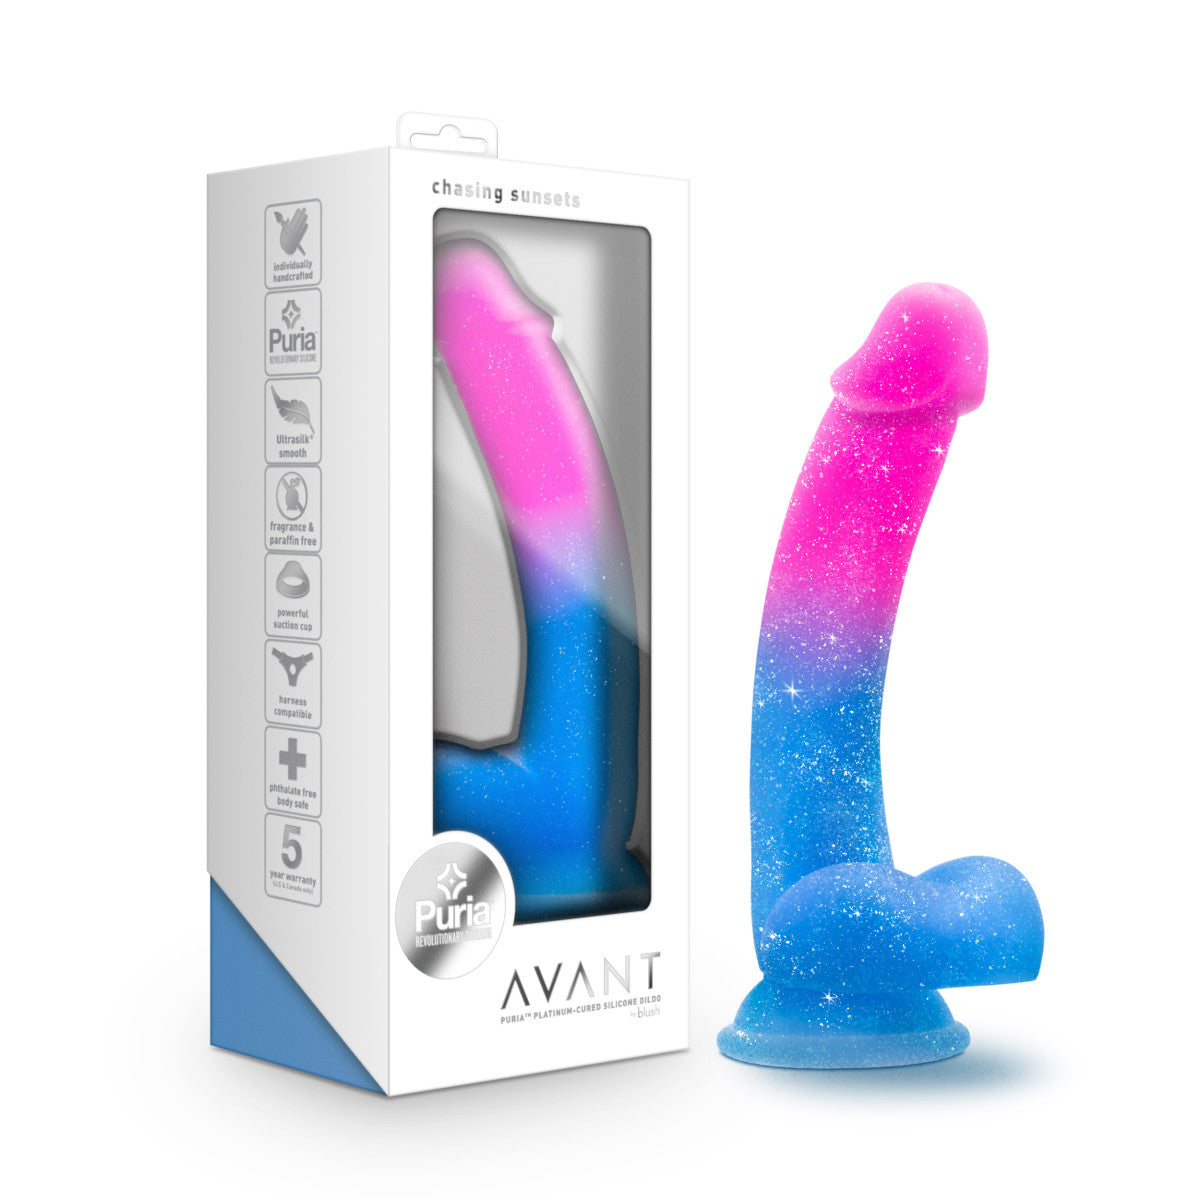 Blush Avant | Chasing Sunsets Mermaid: Artisan 8 Inch Dildo with Suction Cup Base - Made with Smooth Ultrasilk® Purio™ Silicone